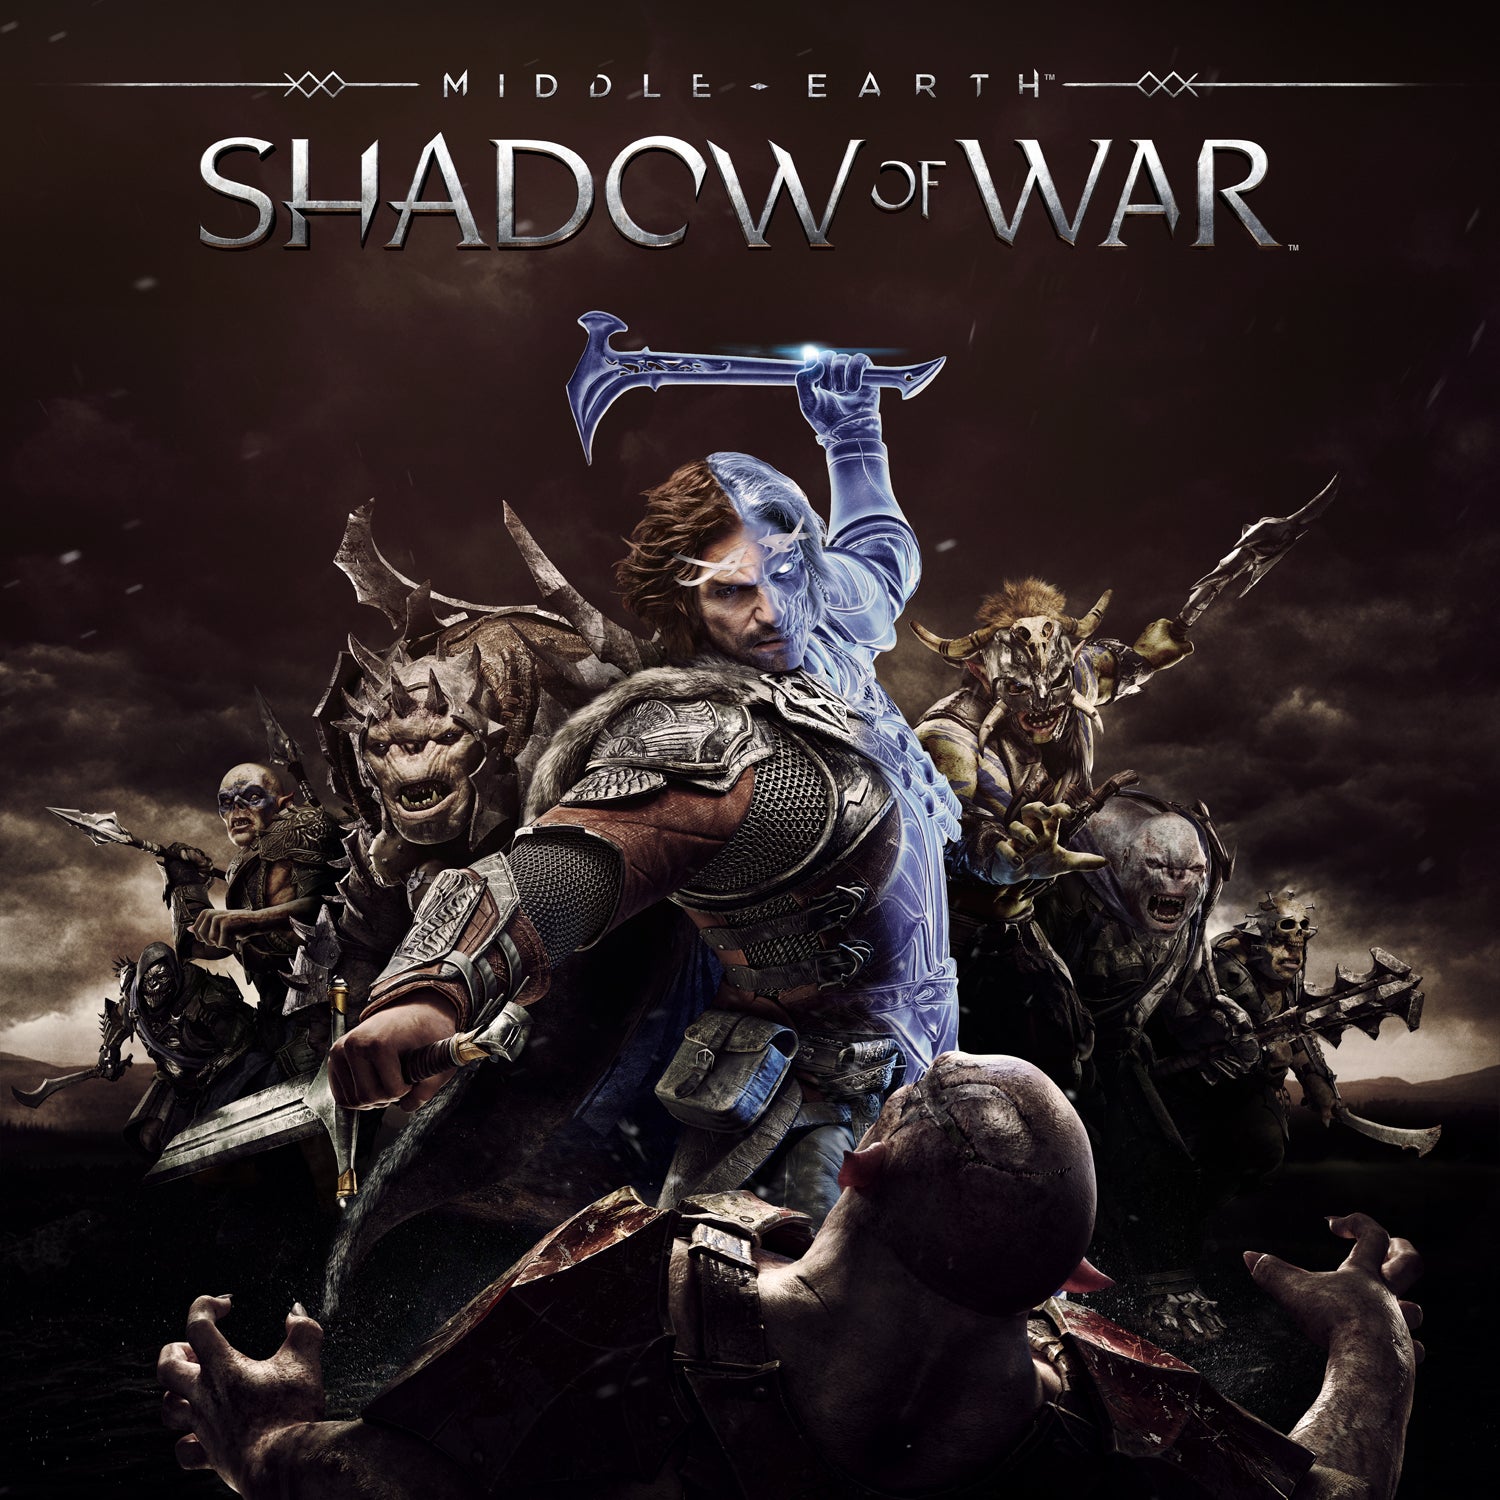 Middle-Earth-Shadow-of-War---BUTTON-1.jpg